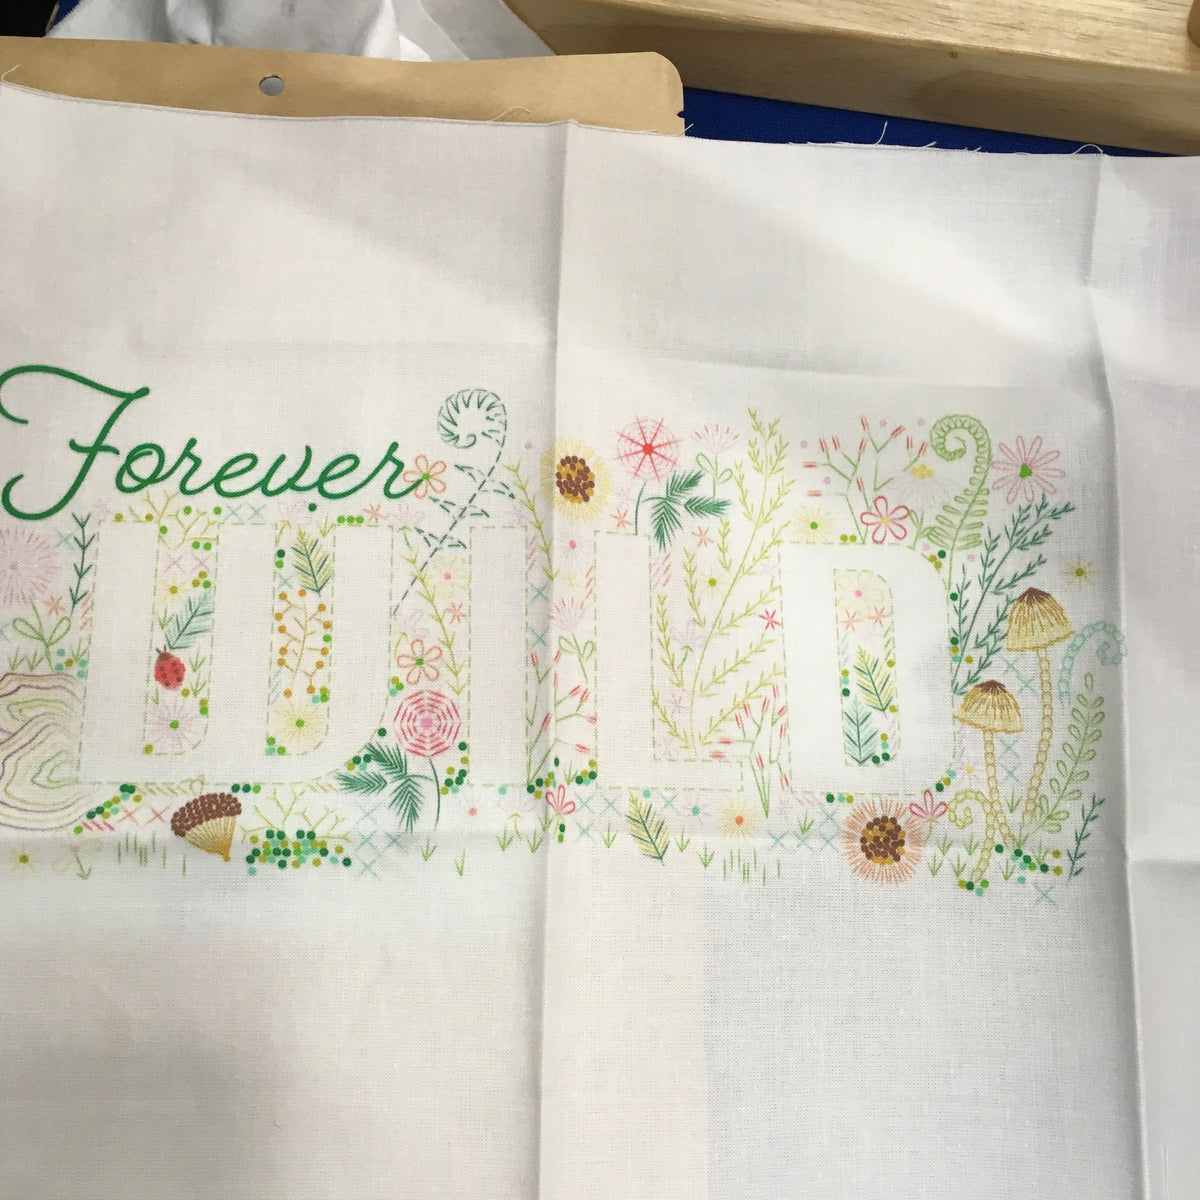 Stash Buster! Forever Wild Embroidery Kit